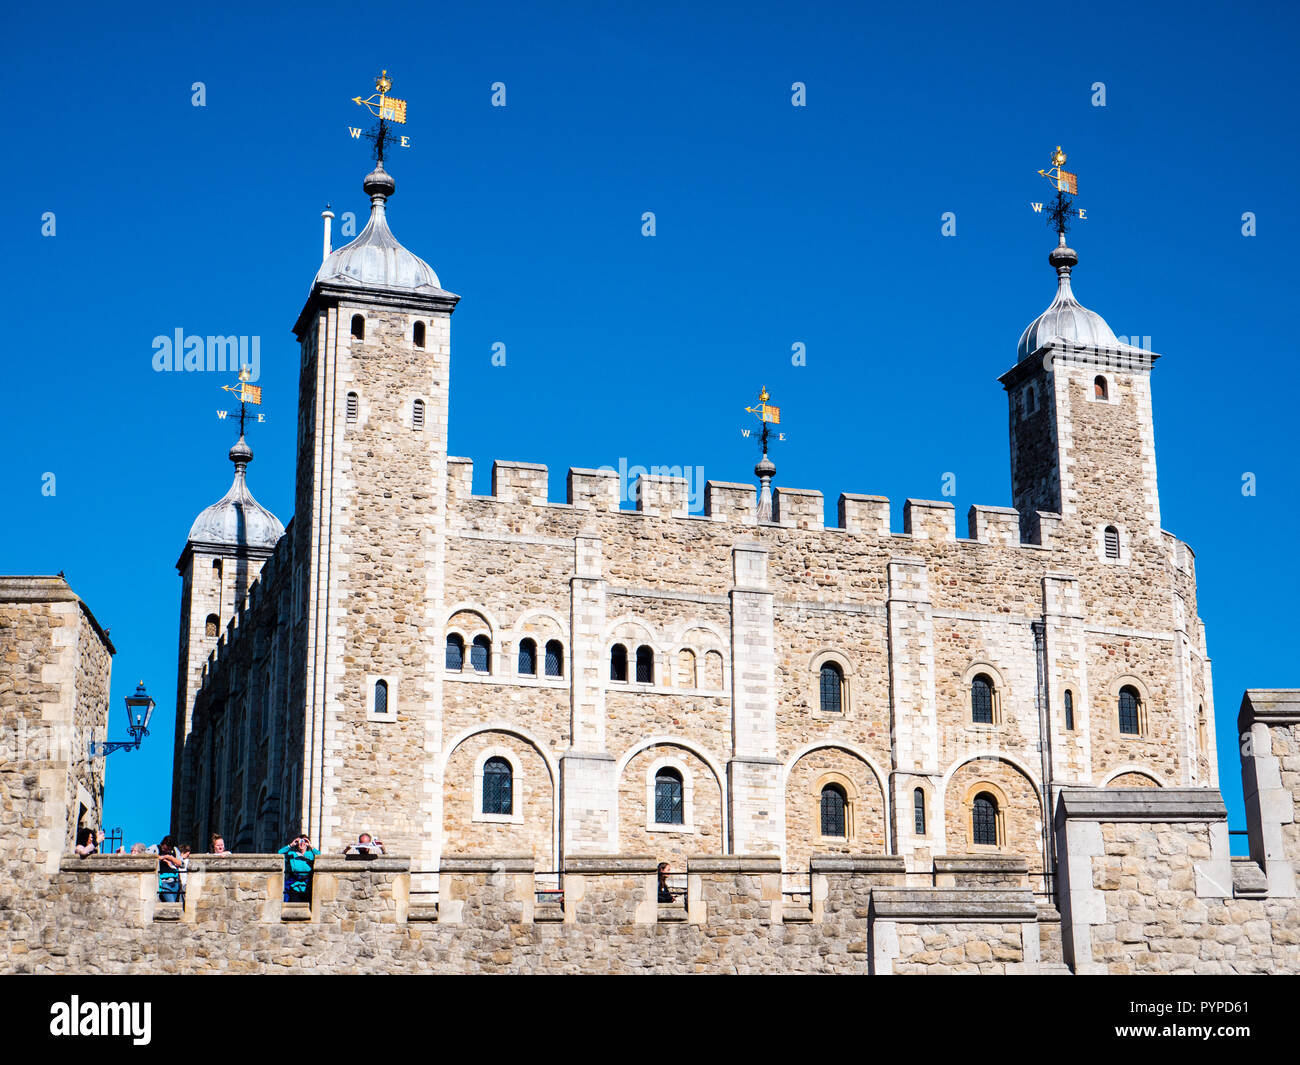 View of White Tower, Across Battlements, Tower of London, England, UK, GB. Stock Photo